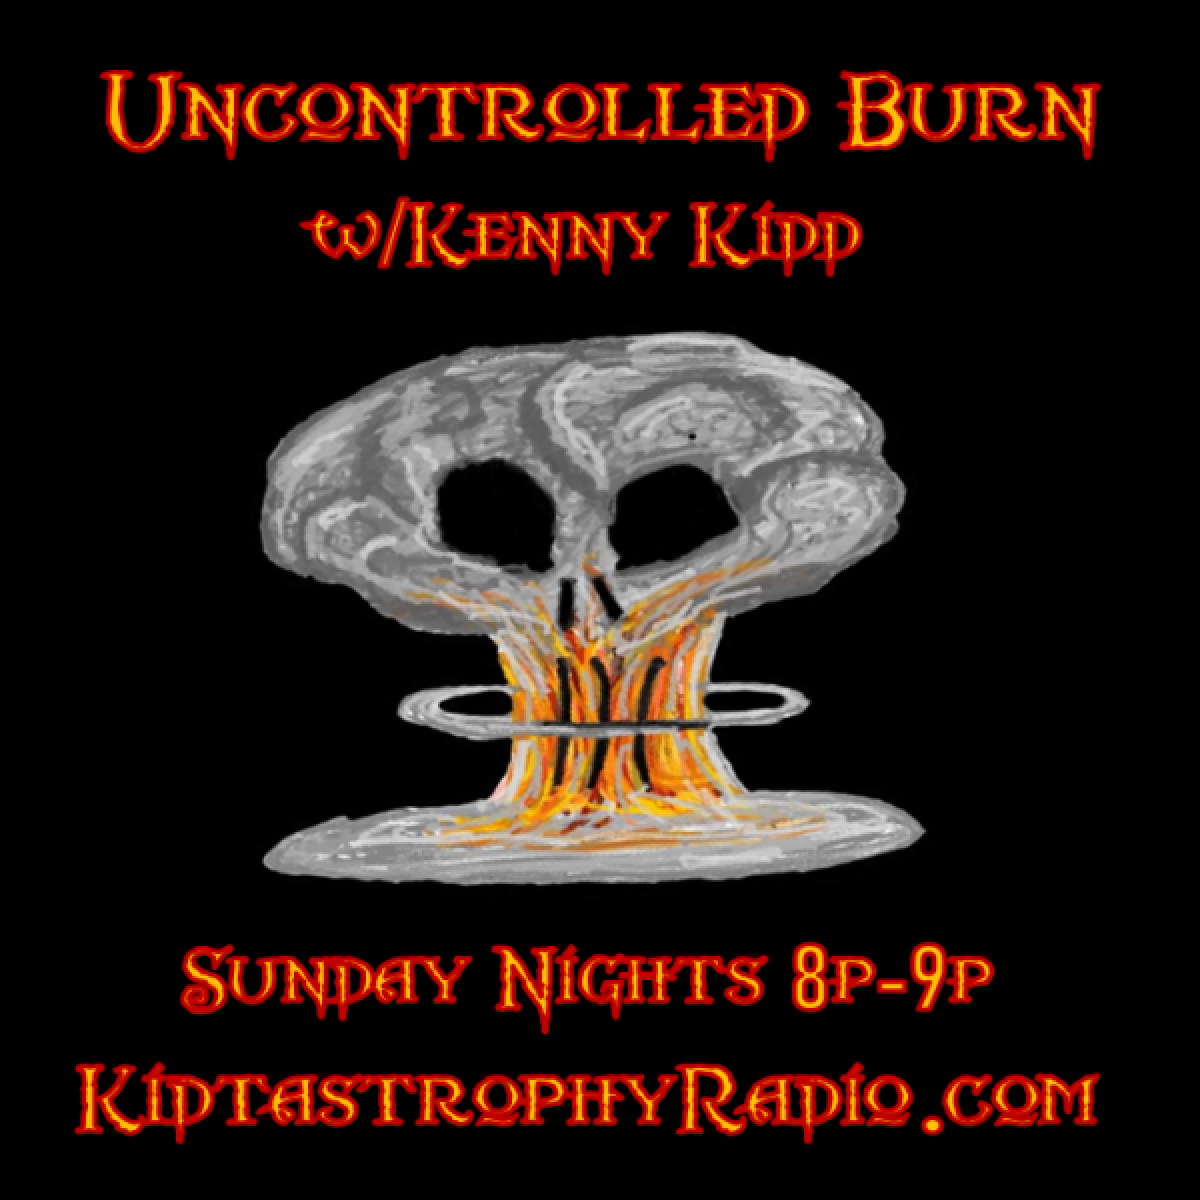 Art for Uncontrolled Burn Promo by Kenny Kidd